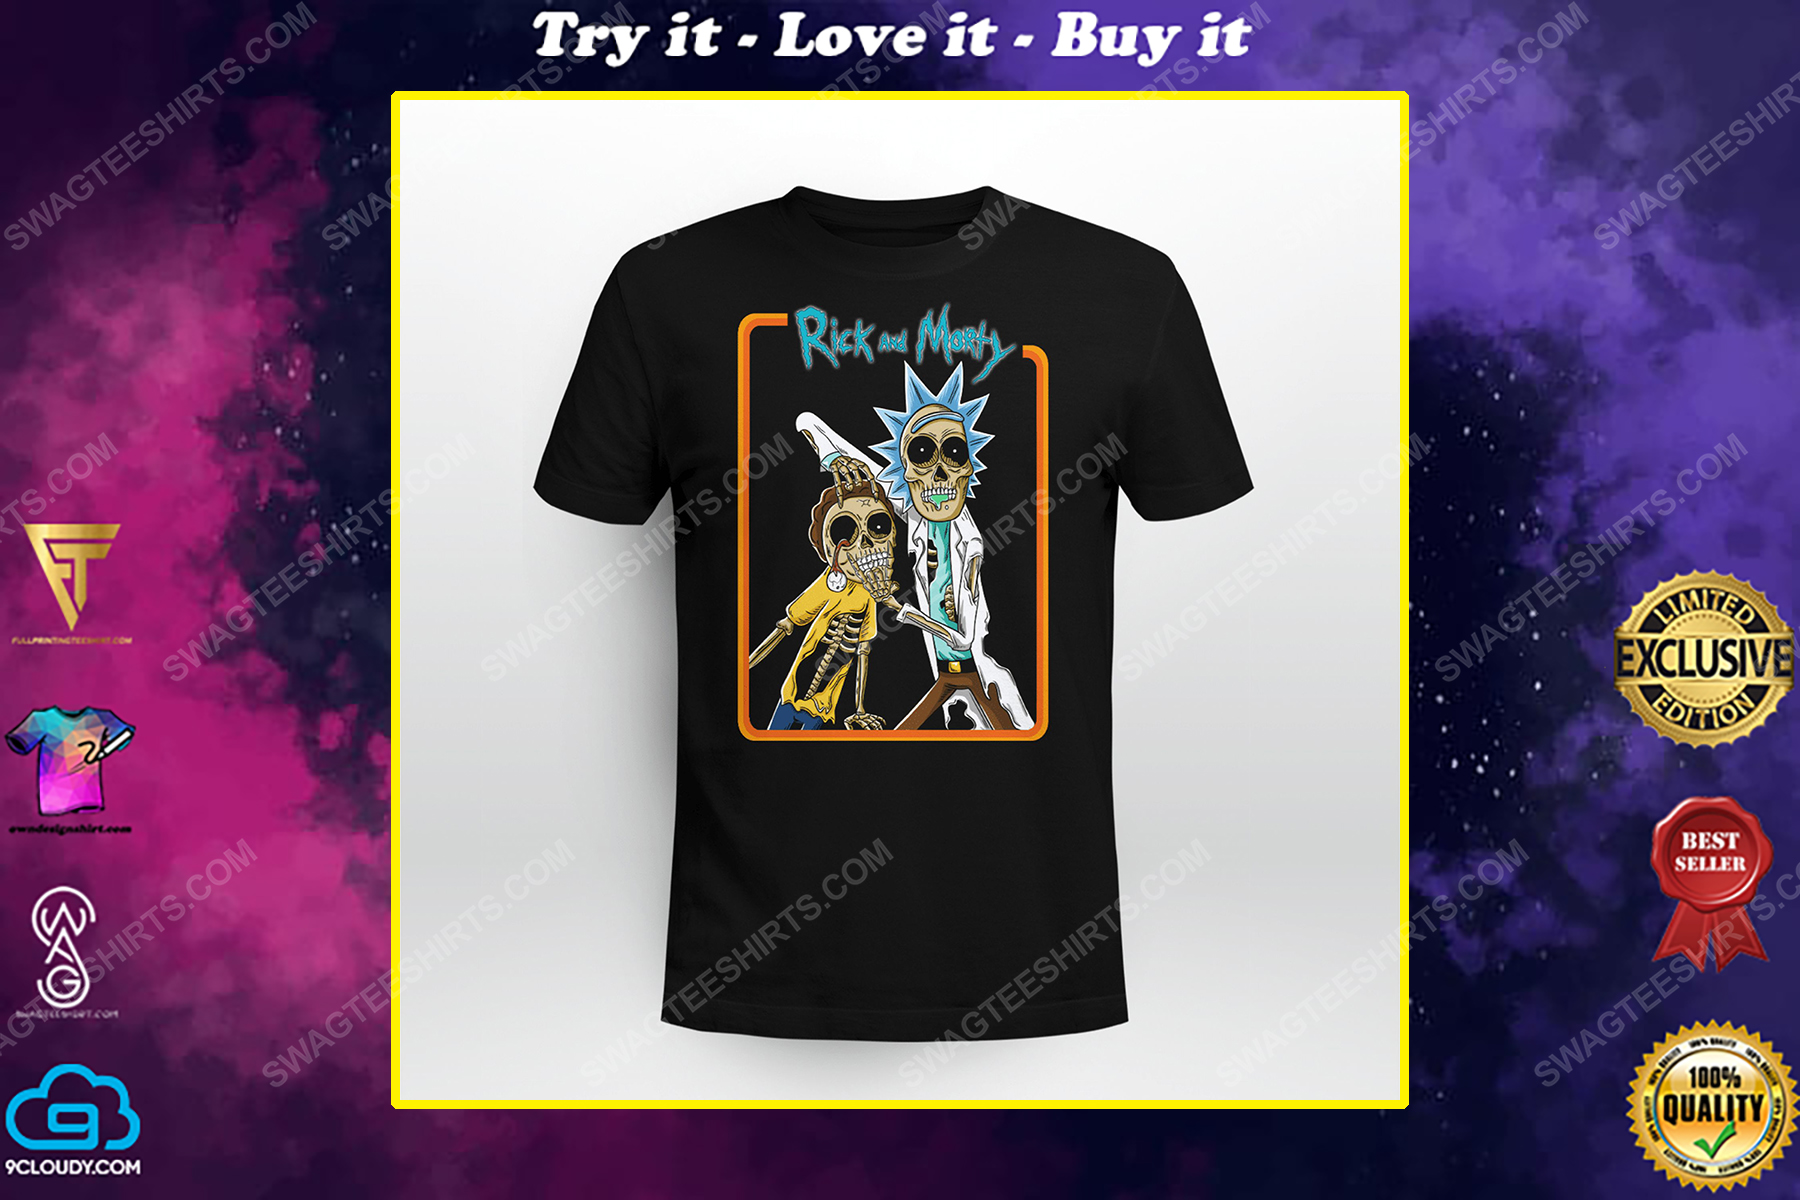 Rick and morty tv show zombie halloween shirt